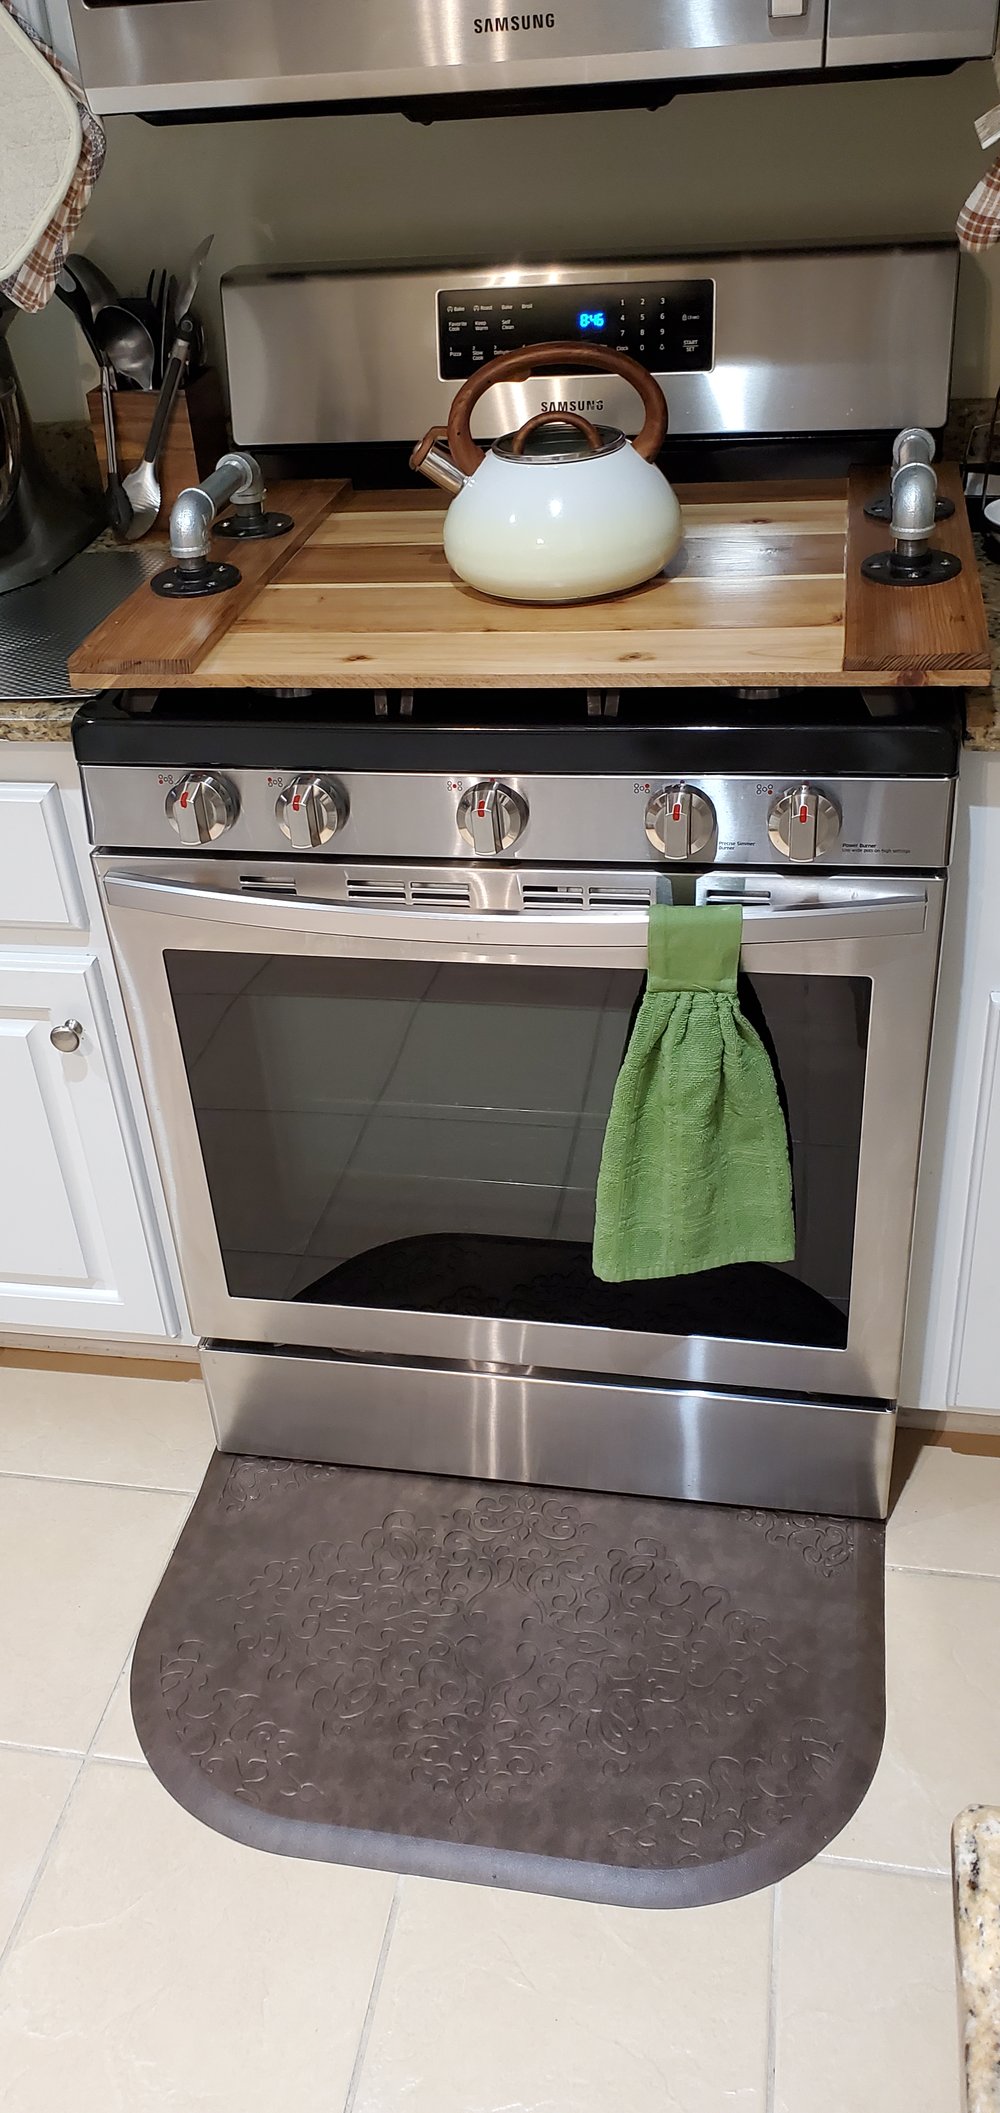 Stove Top Cover-Stove Cover-Noodle Board-Wood stove cover-Electric